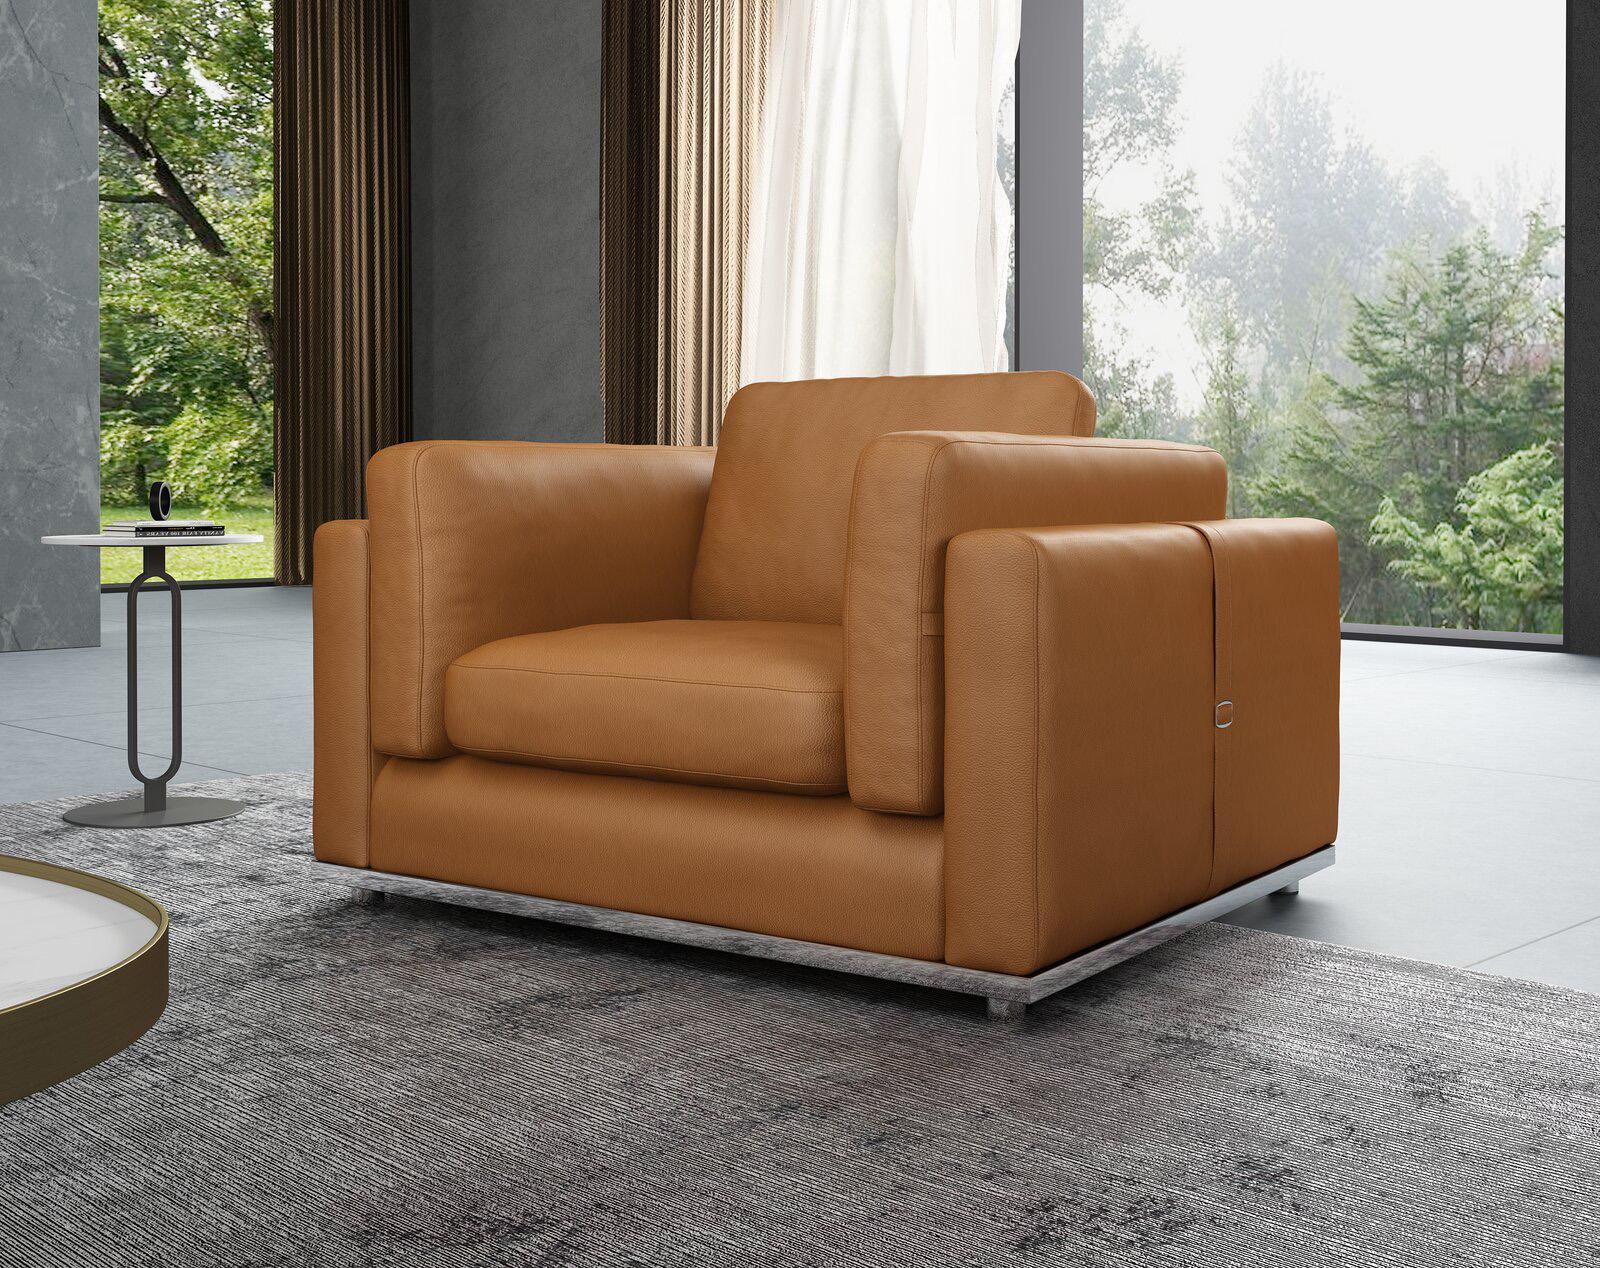 Contemporary, Modern Arm Chair PICASSO EF-25552-C in Cognac Leather